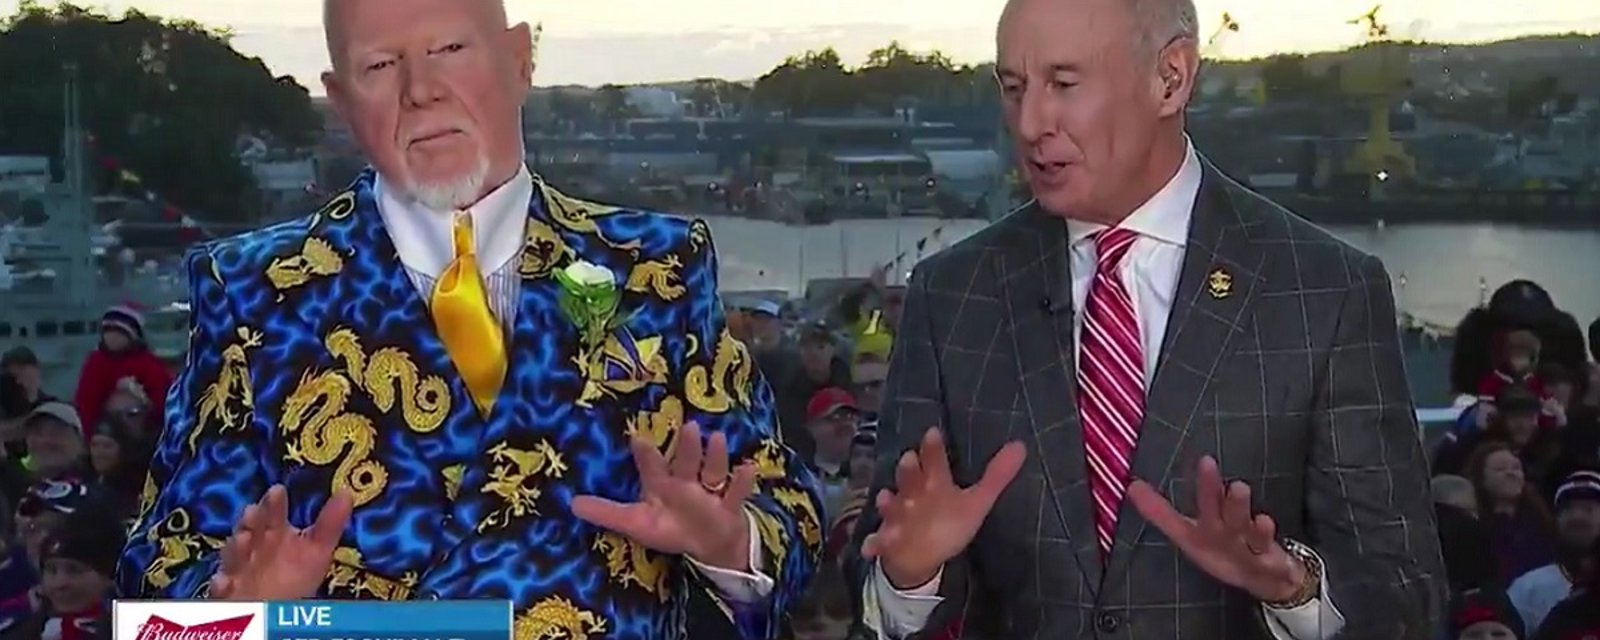 Sportsnet issues a statement condemning comments from Don Cherry.